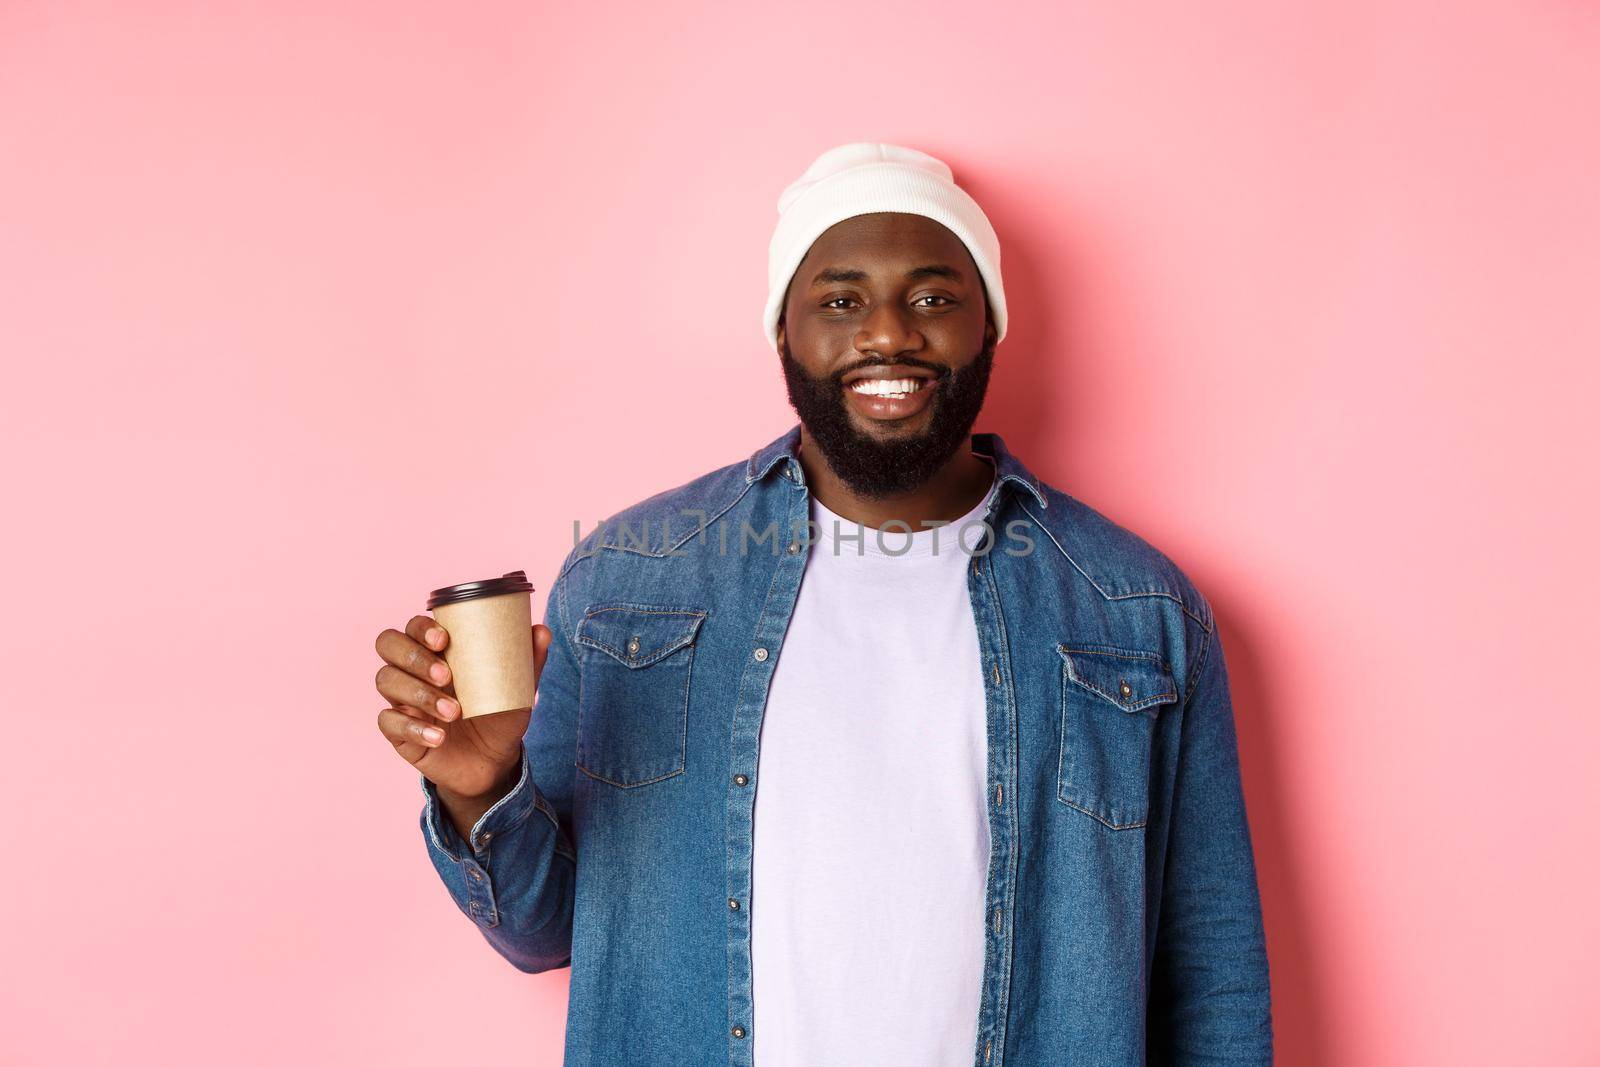 Handsome modern Black man drinking takeaway coffee, smiling and looking satisfied at camera, standing over pink background.